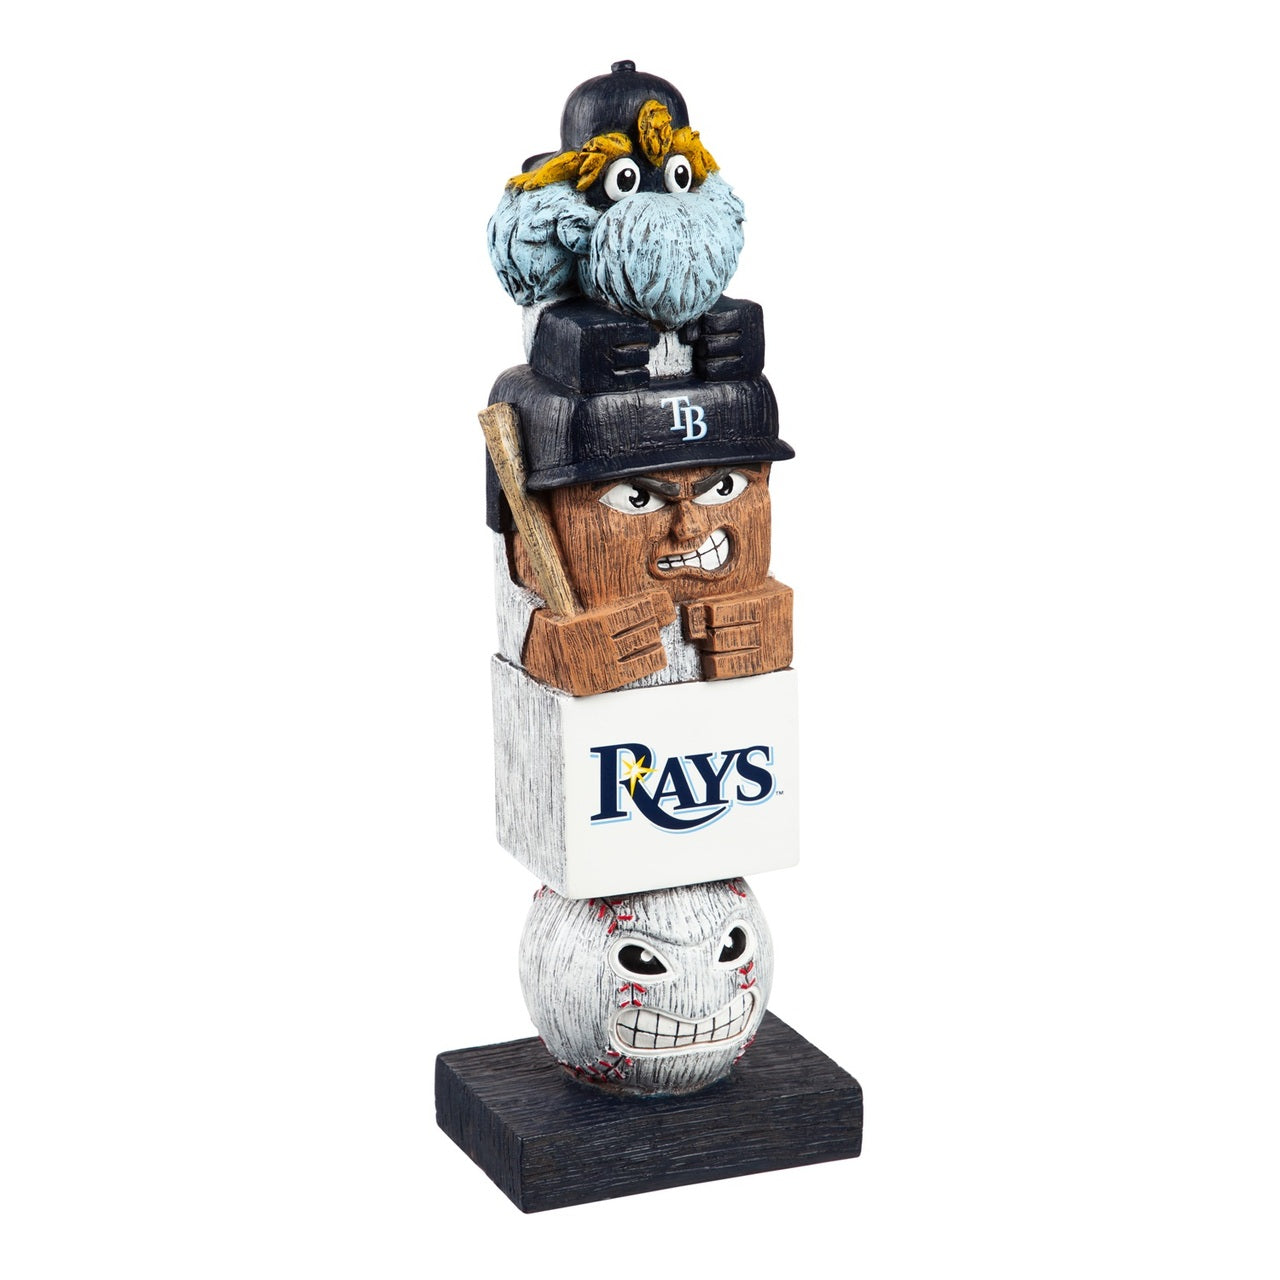 Tampa Bay Rays Team Tiki Totem Garden Statue by Evergreen